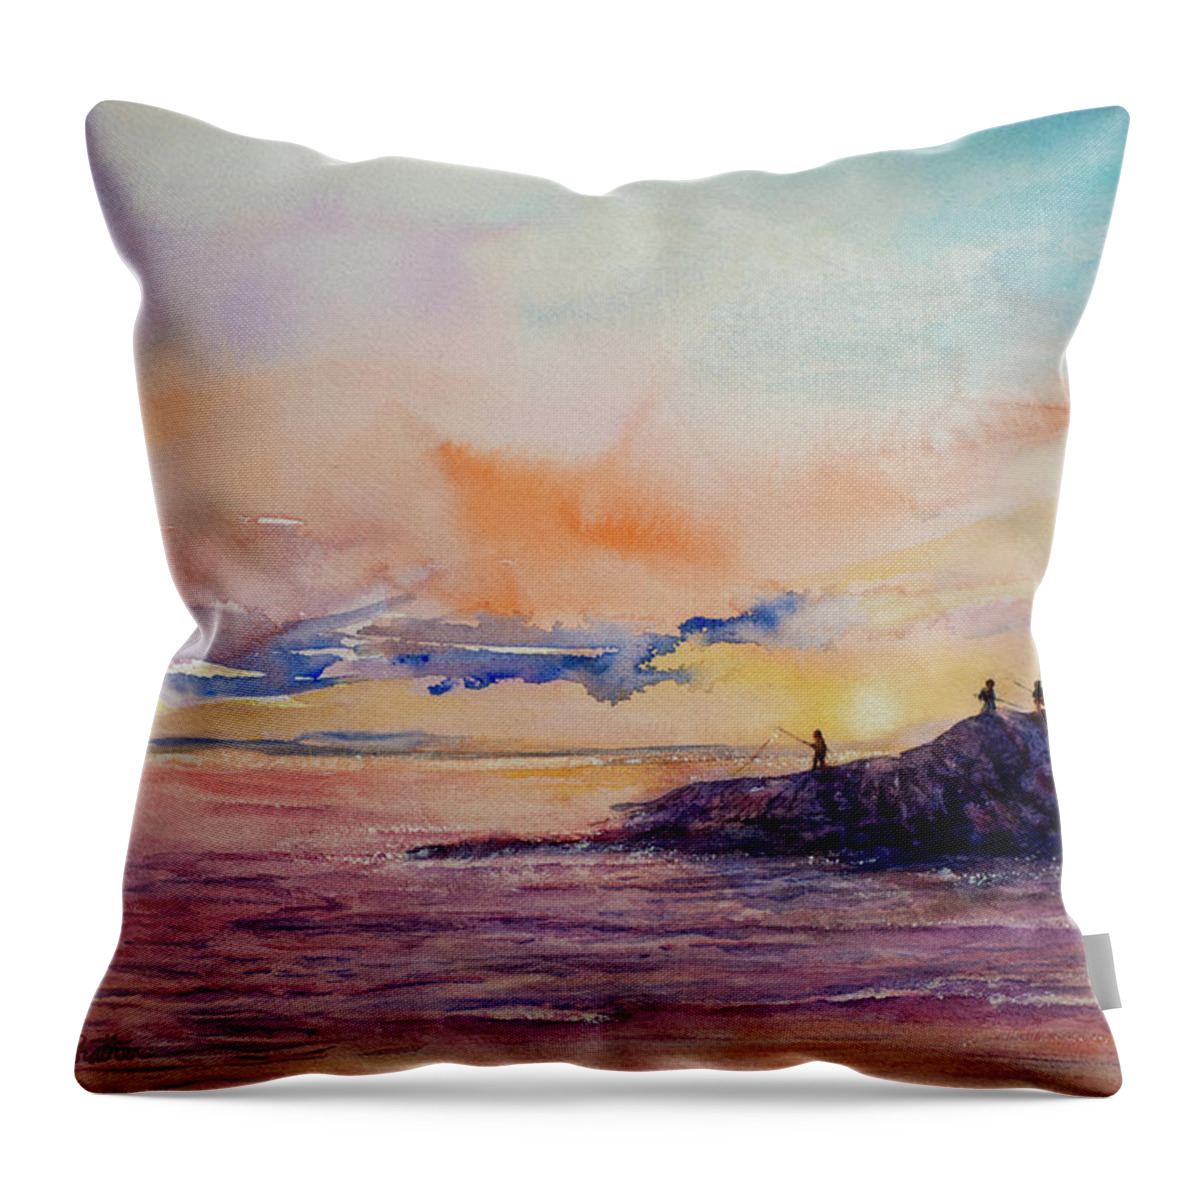 Fishing Throw Pillow featuring the painting Soaking Bait - Oahu by Cheryl Prather